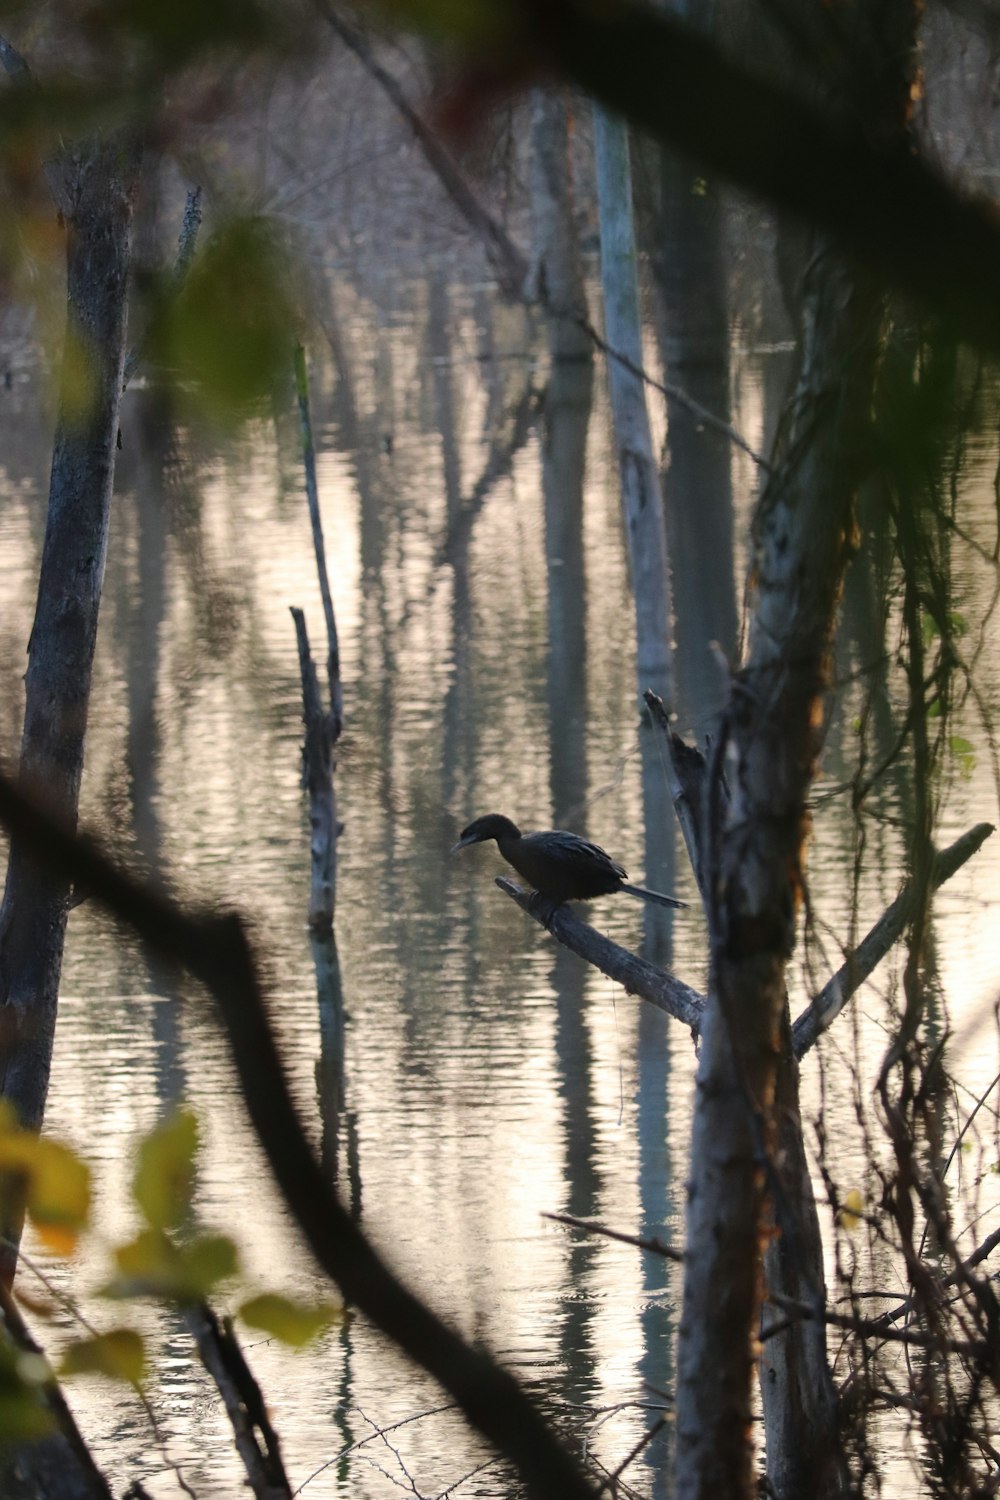 a bird is sitting on a branch in the water